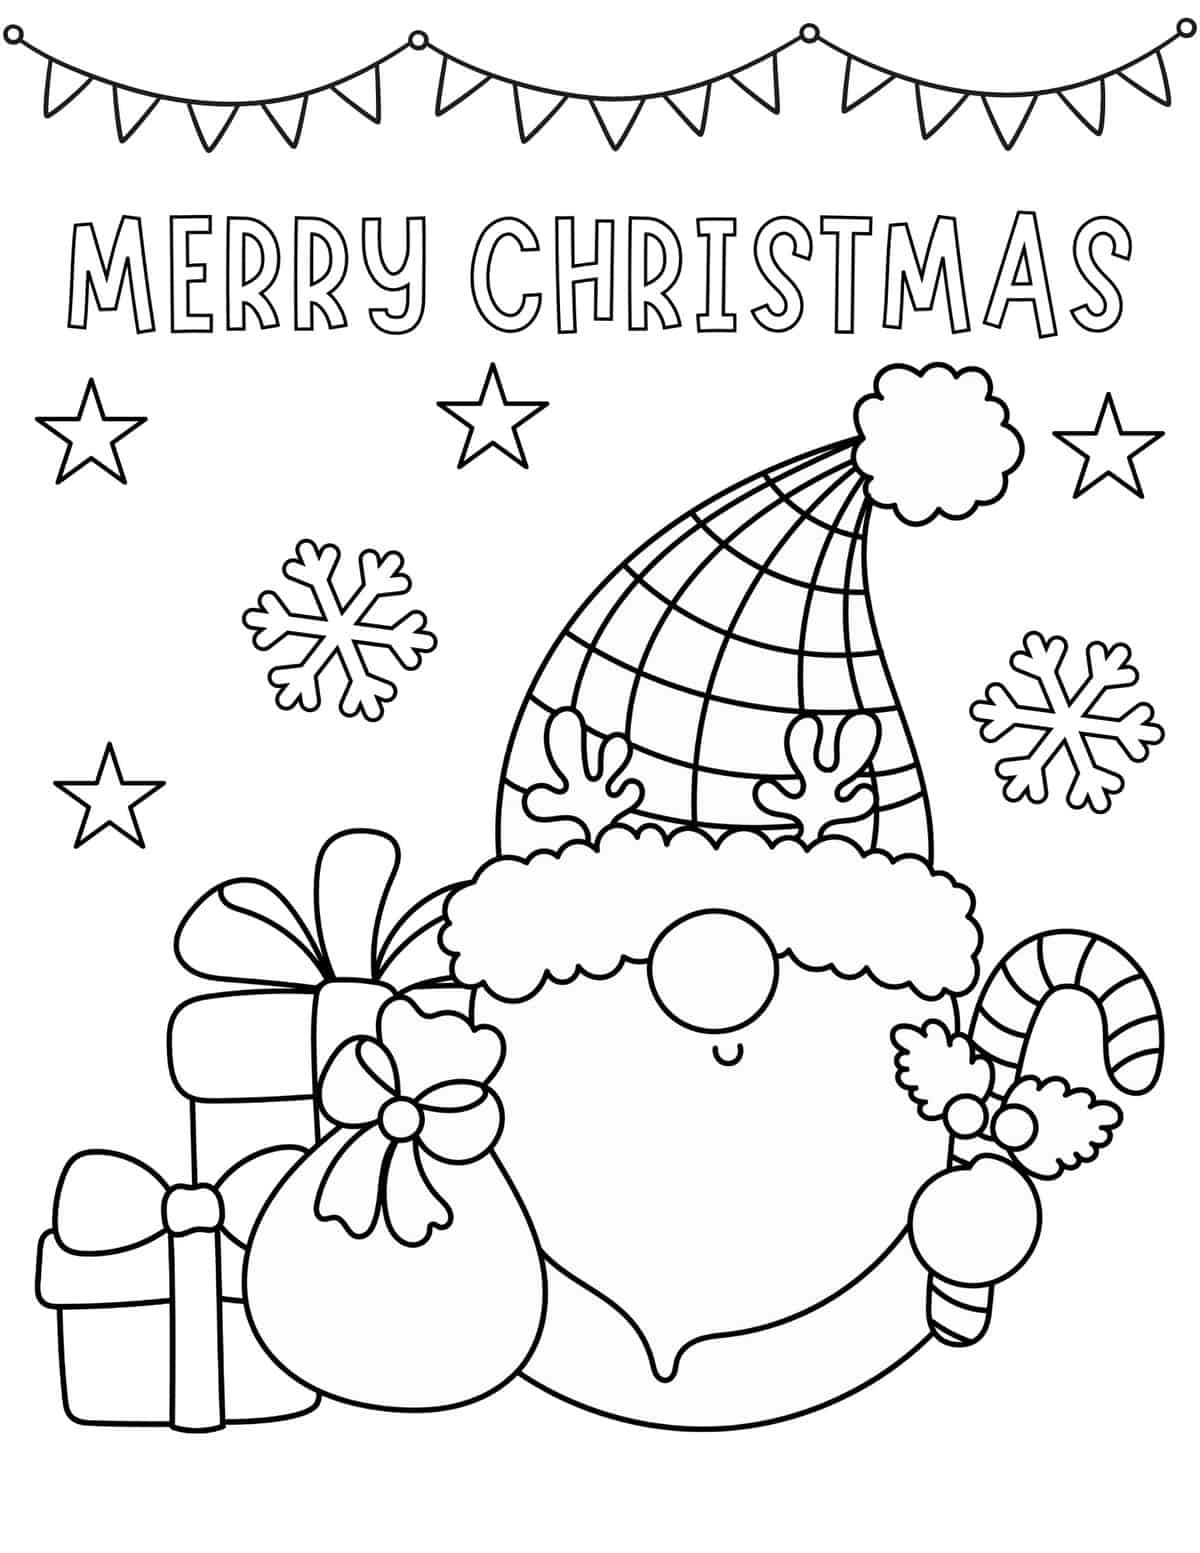 150 Free Christmas Coloring Pages For Kids - Prudent Penny Pincher - Free Printable Christmas Pictures To Colour